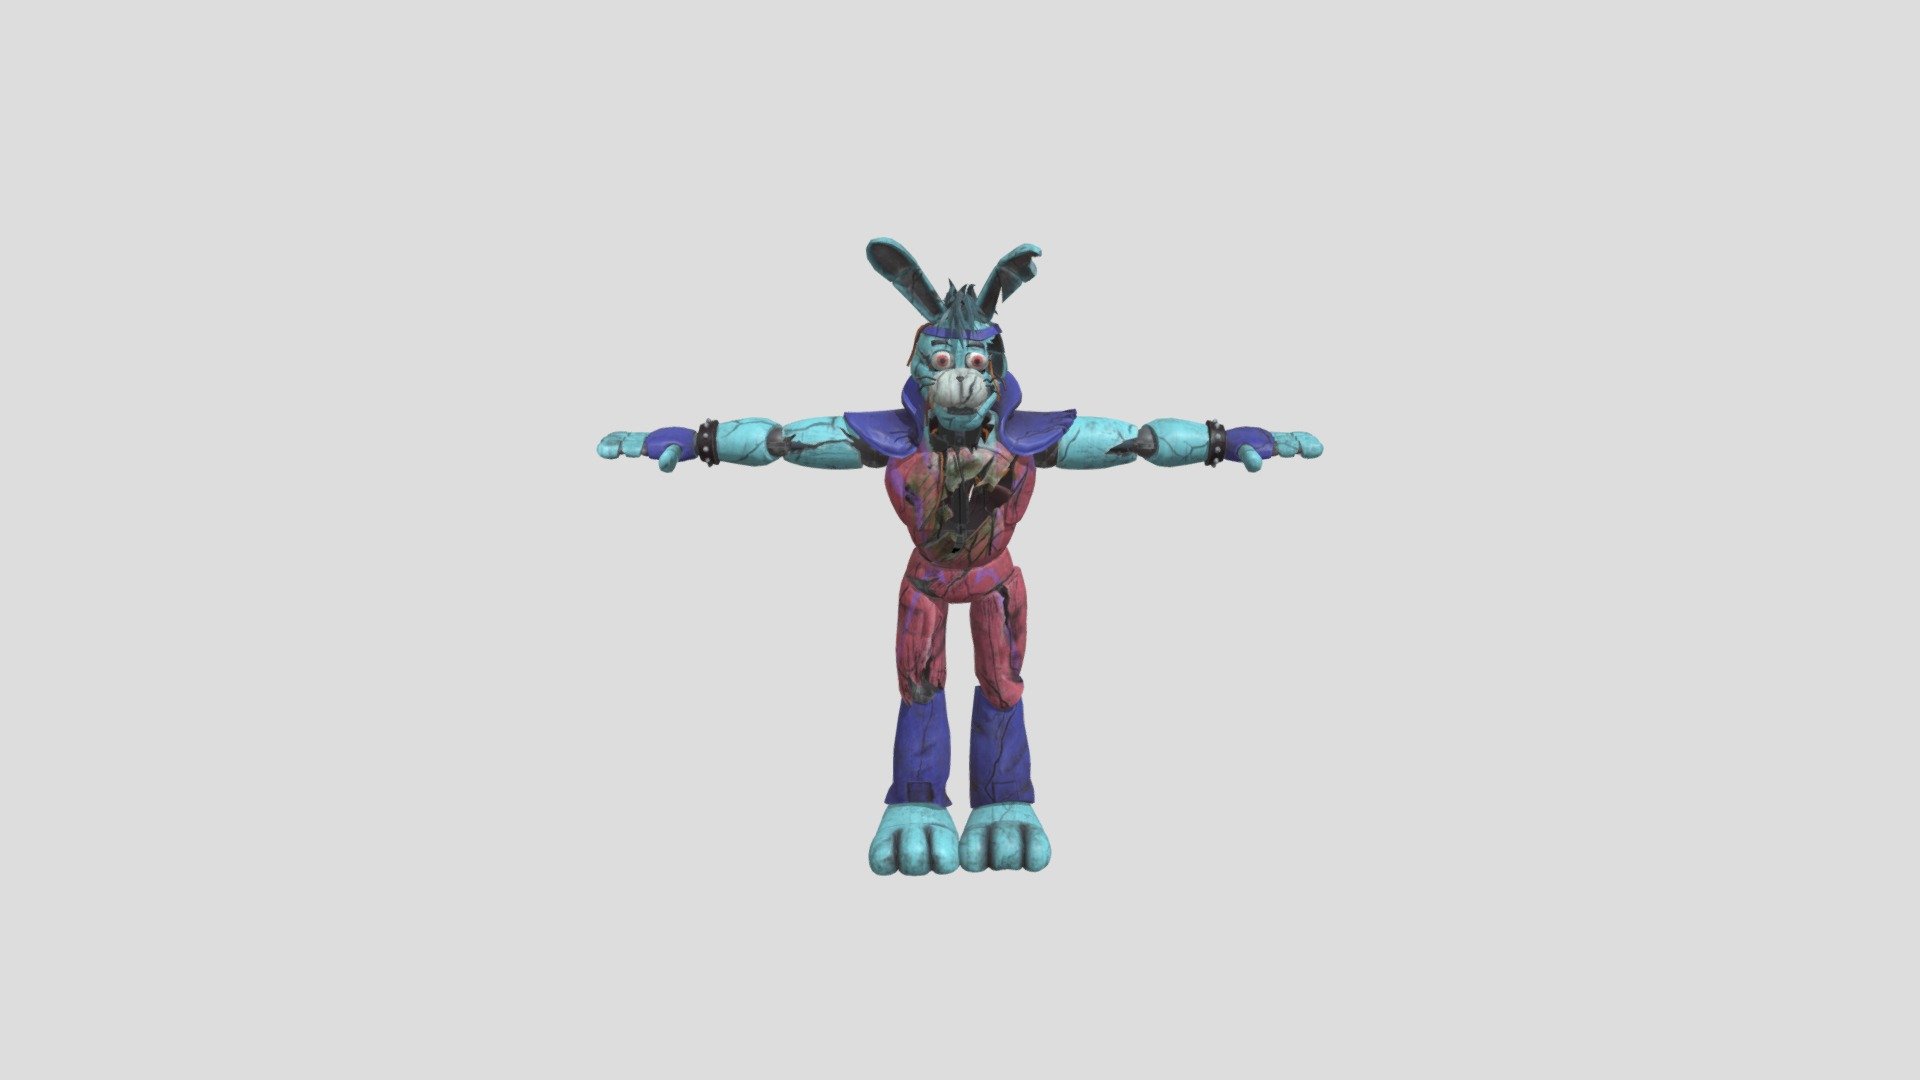 3D file FIVE NIGHTS AT FREDDY'S Bonnie Glamrock Shattered FILES